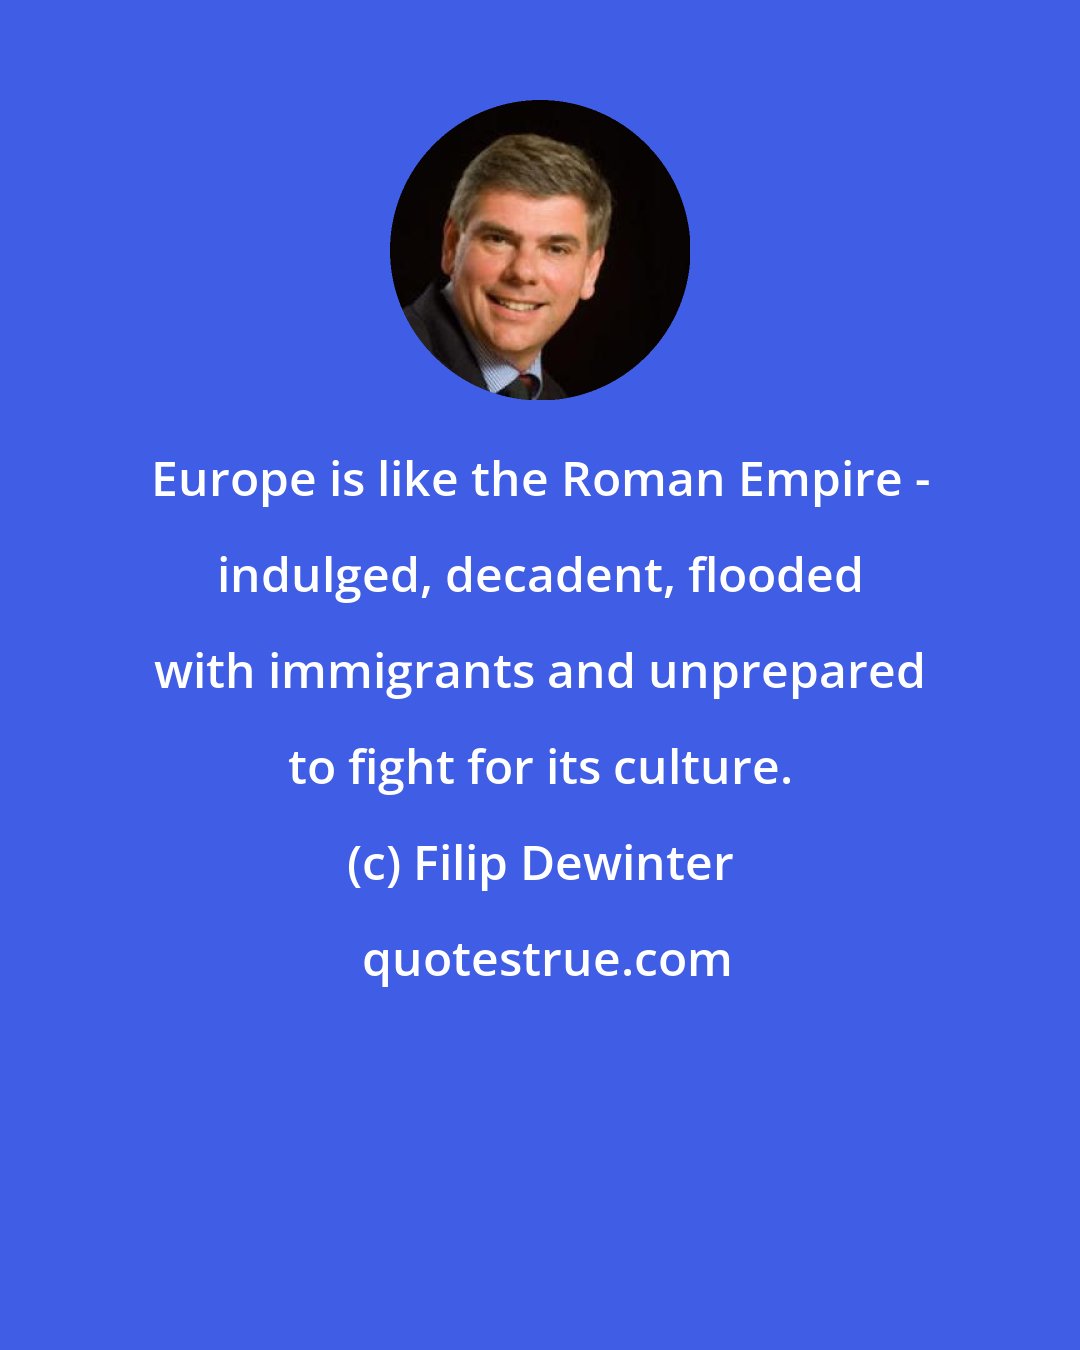 Filip Dewinter: Europe is like the Roman Empire - indulged, decadent, flooded with immigrants and unprepared to fight for its culture.